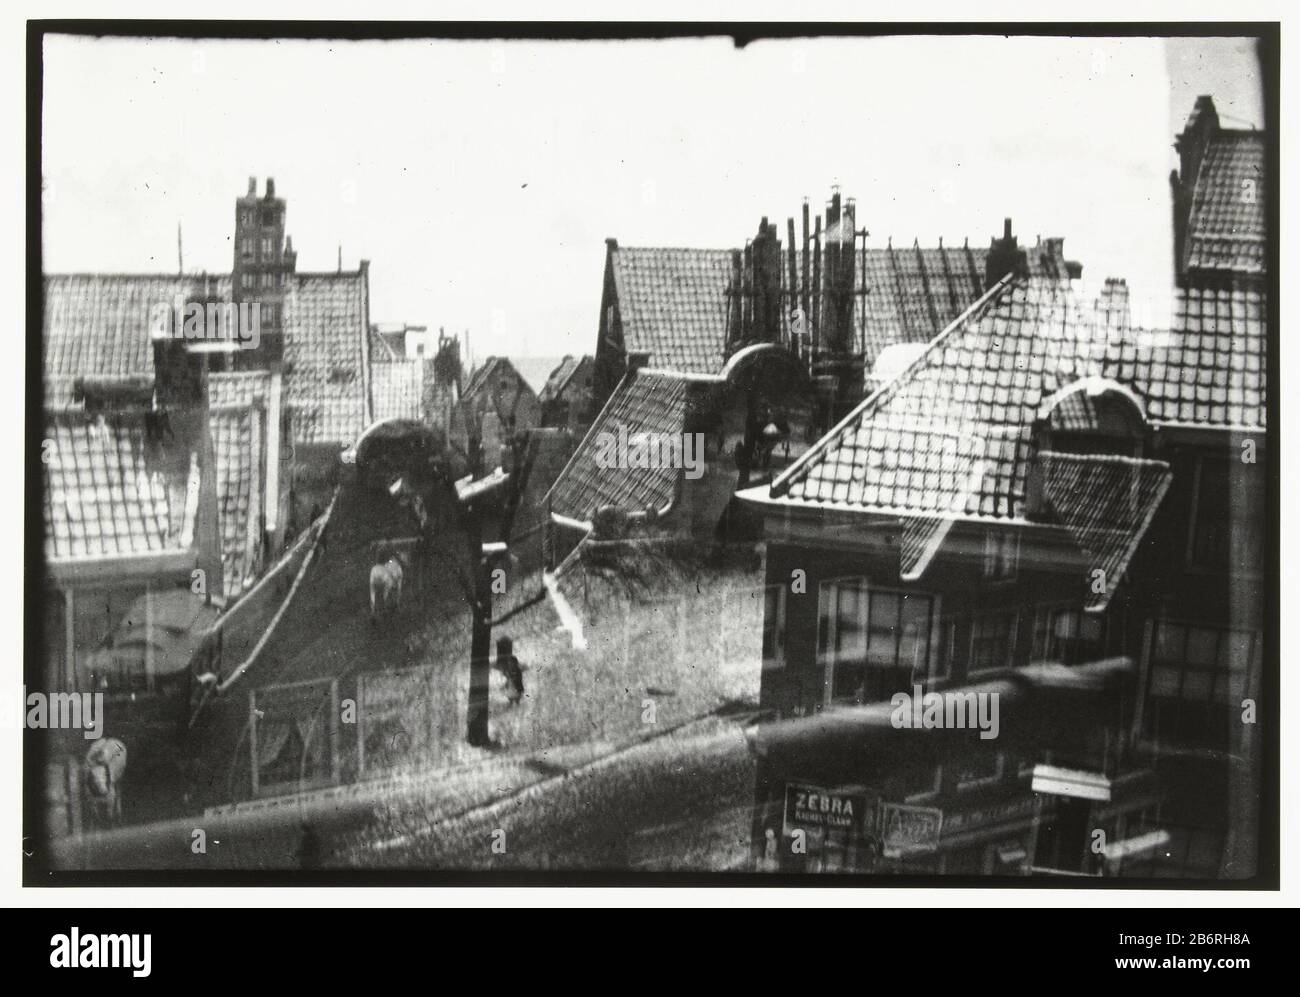 Gezicht over daken in Amsterdam View over rooftops in Amsterdam Property Type: photographs Item number: RP-F K89494 Manufacturer : photographer George Hendrik Breitner Publisher: Harm Botman (listed property) Place manufacture: Photographer: Amsterdam Publisher: Netherlands Date: ca. 1890 - ca. 1910 Physical features: gelatin silver print material: paper Technique: gelatin silver print dimensions: sheet: h 50.5 cm. B × 39.8 cm. Photo: H 40.0 cm. B × 27.2 cm. Notes Modern print negative BR 1245 (collection RKD) .Onderwerp Stock Photo